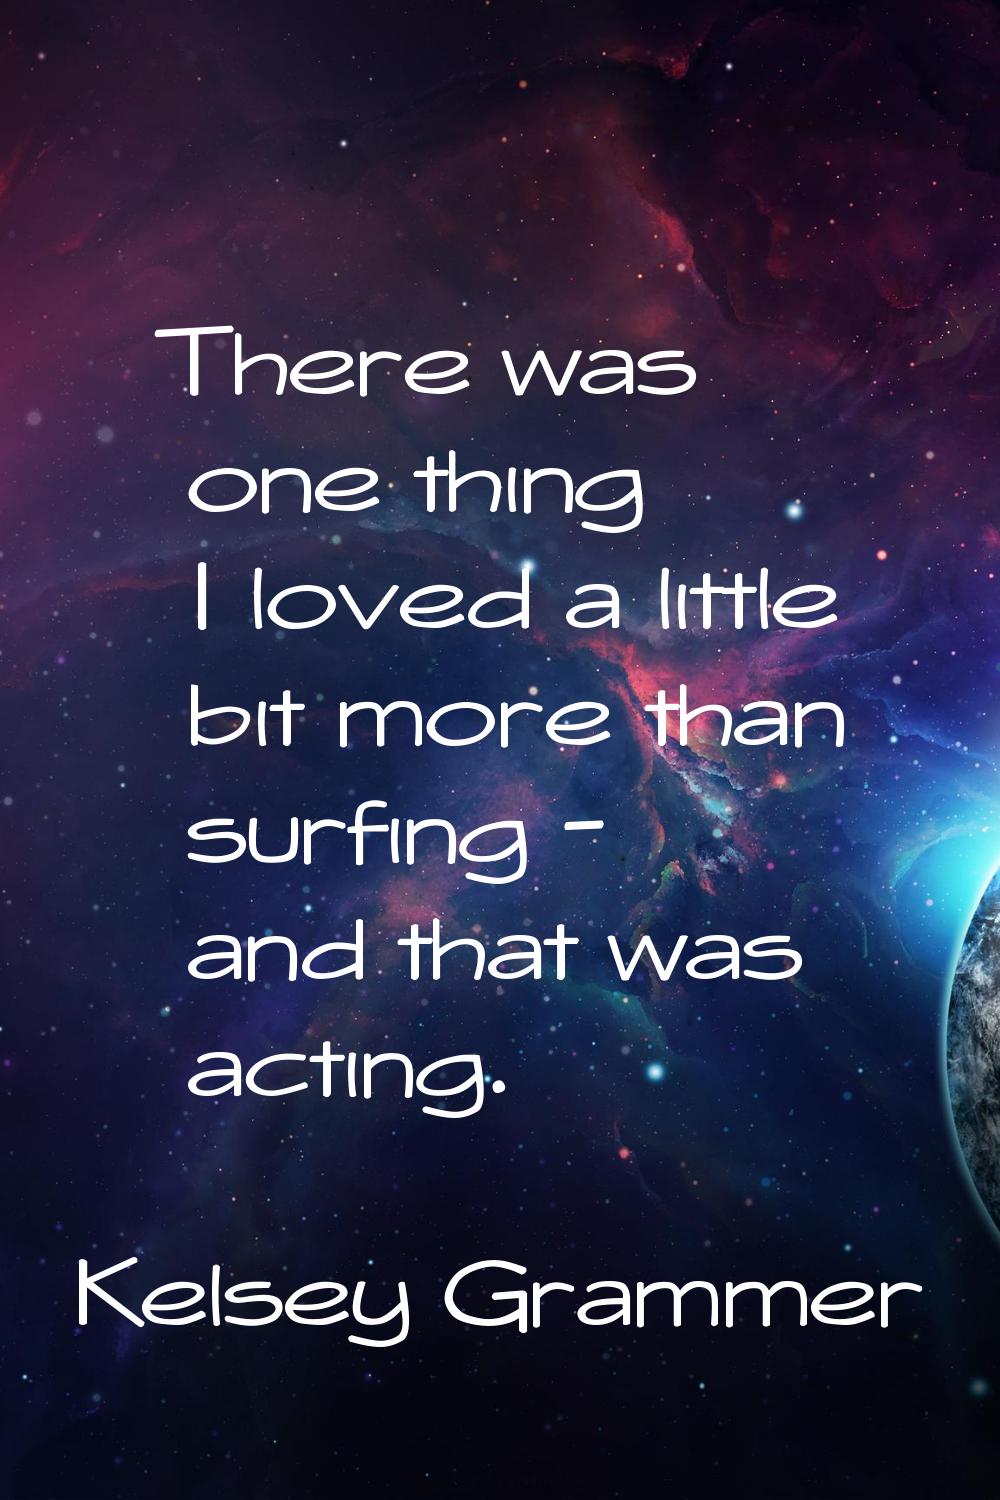 There was one thing I loved a little bit more than surfing - and that was acting.